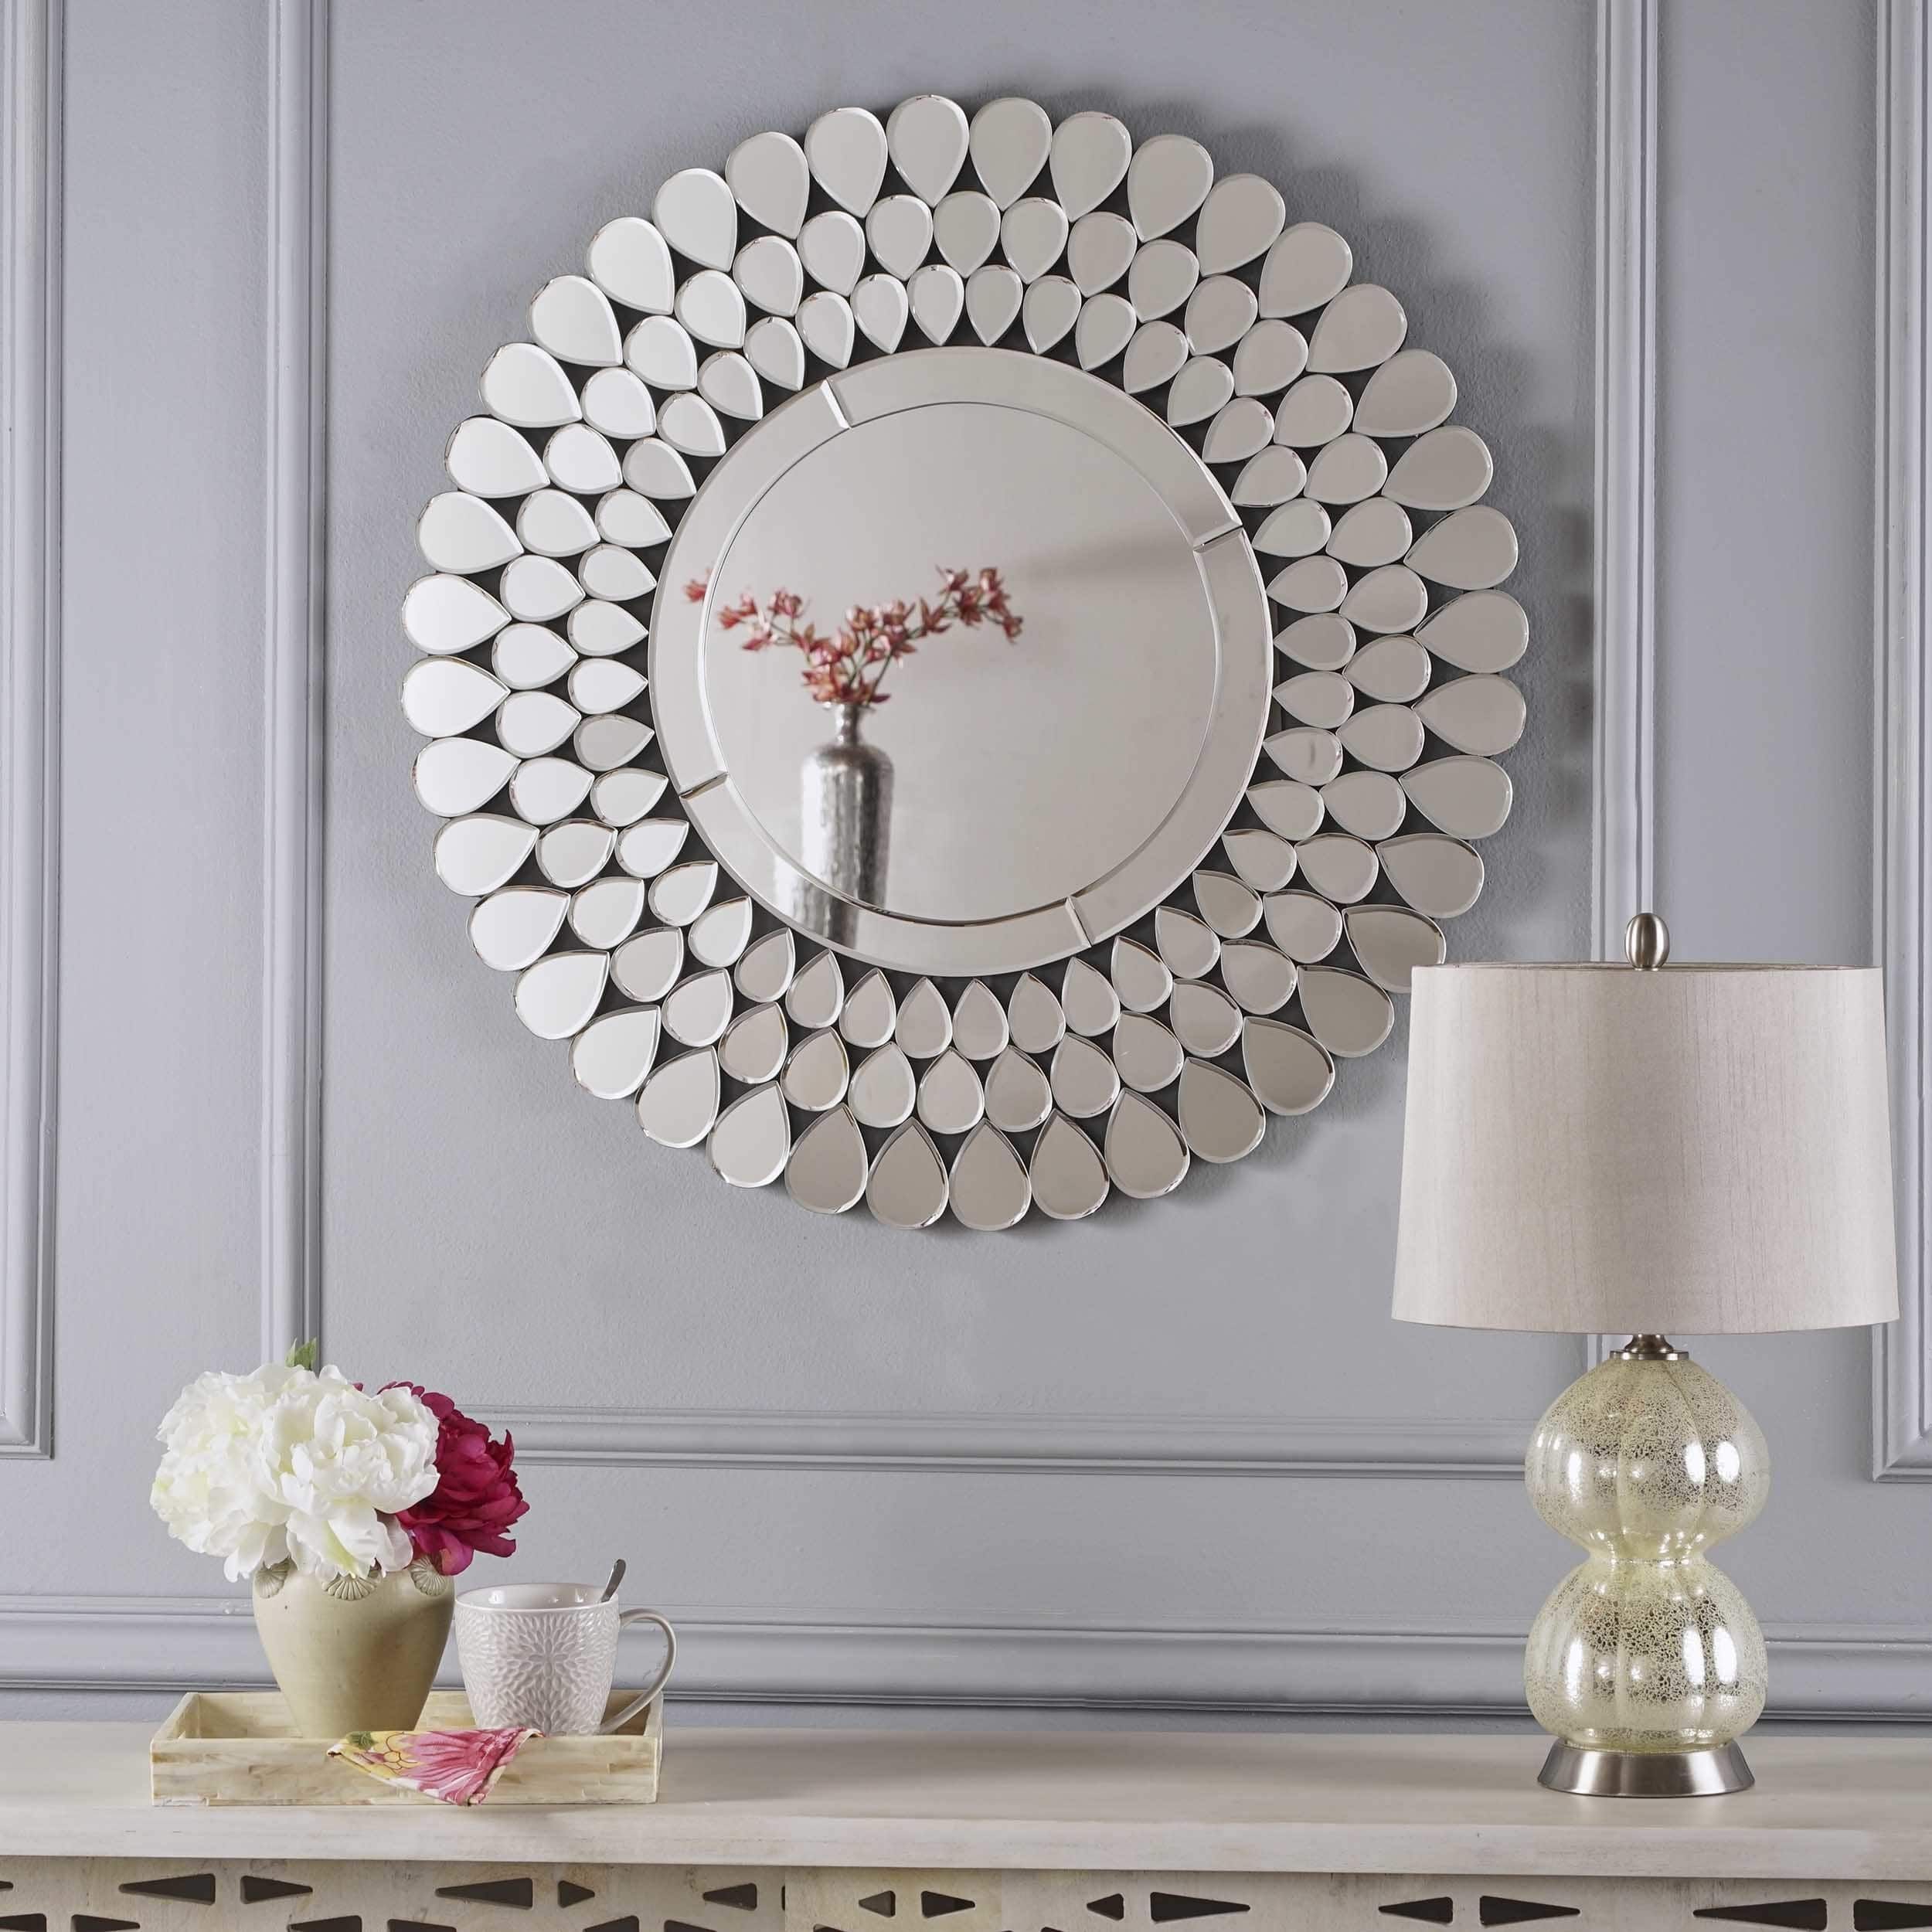 3Rd Fl Irmgard Round Flower Wall Mirrorchristopher With Regard To Sajish Oval Crystal Wall Mirrors (View 7 of 20)